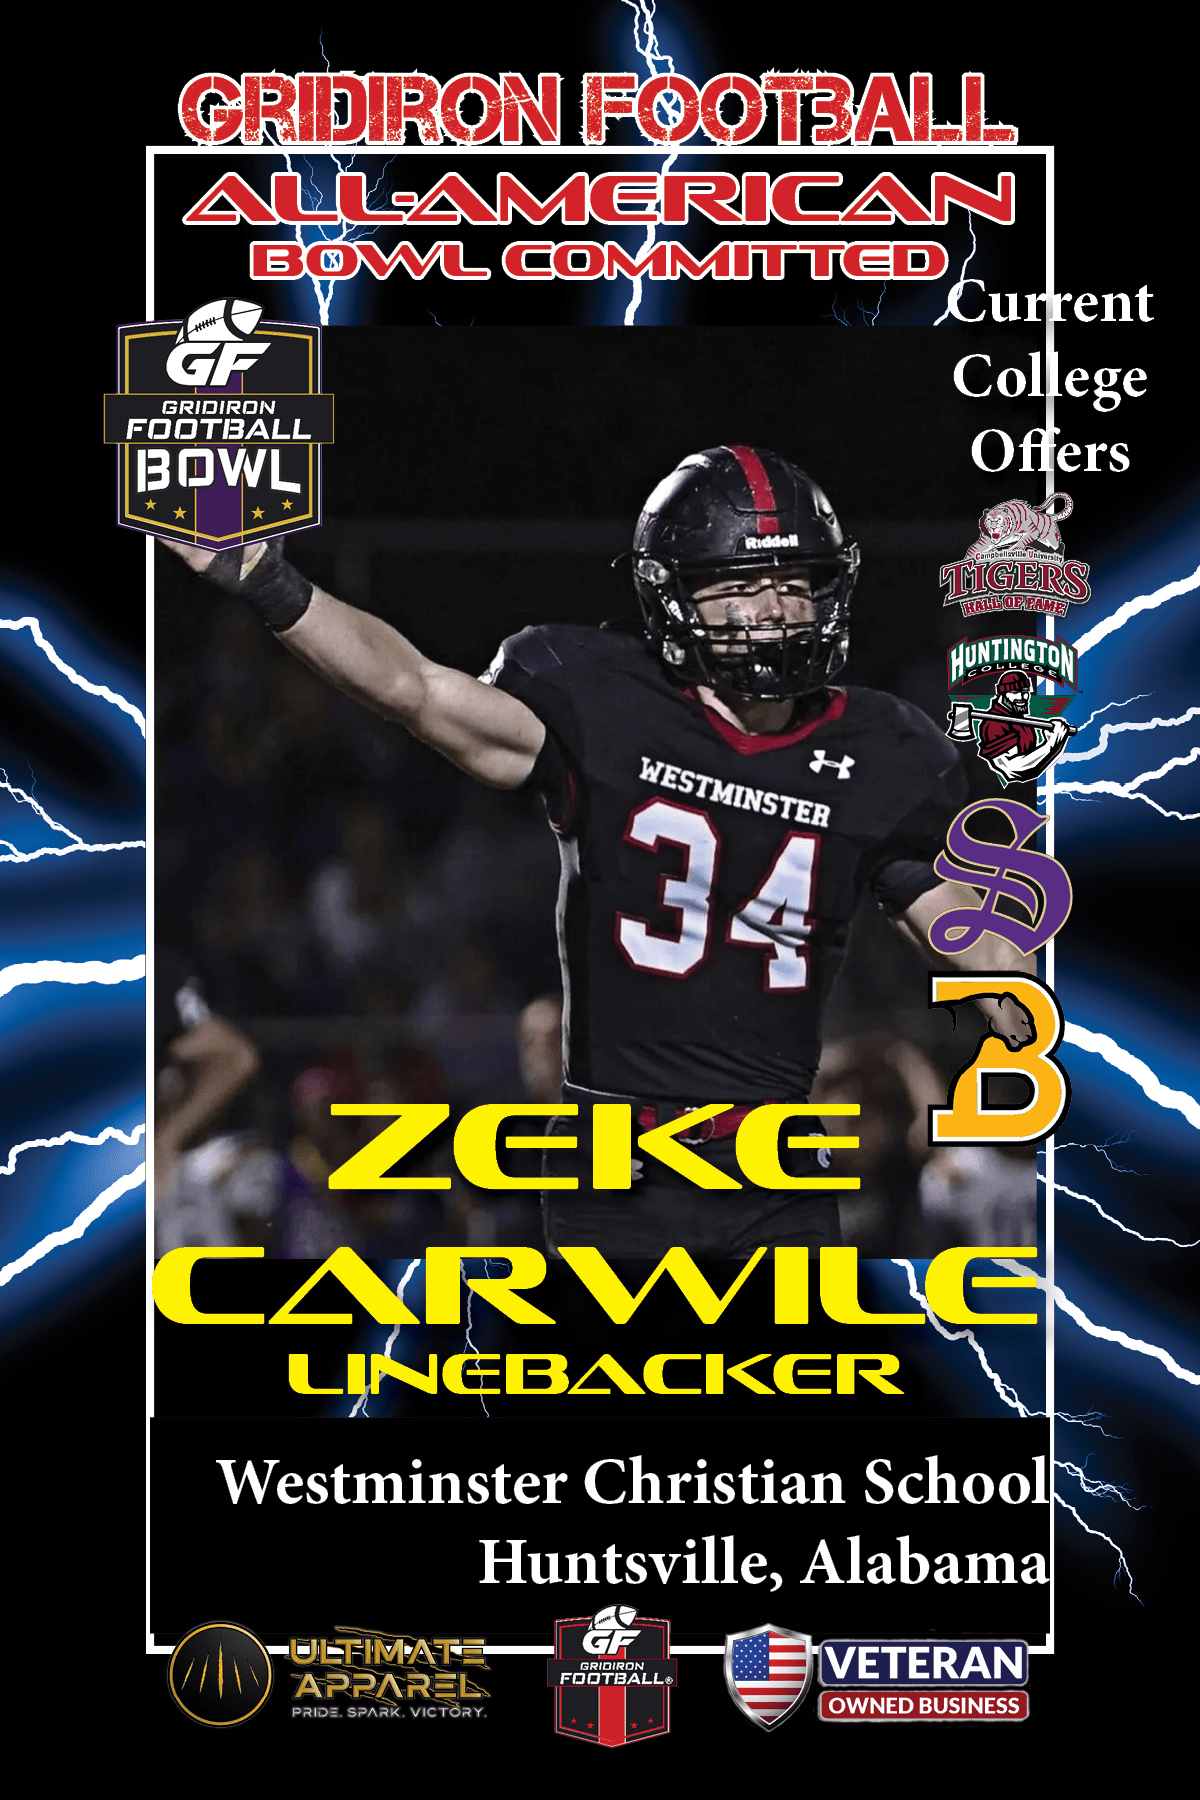 BREAKING NEWS: Westminster Christian Academy (Huntsville, Alabama) LB Zeke Carwile Commits To The Gridiron Football All-American Bowl Game